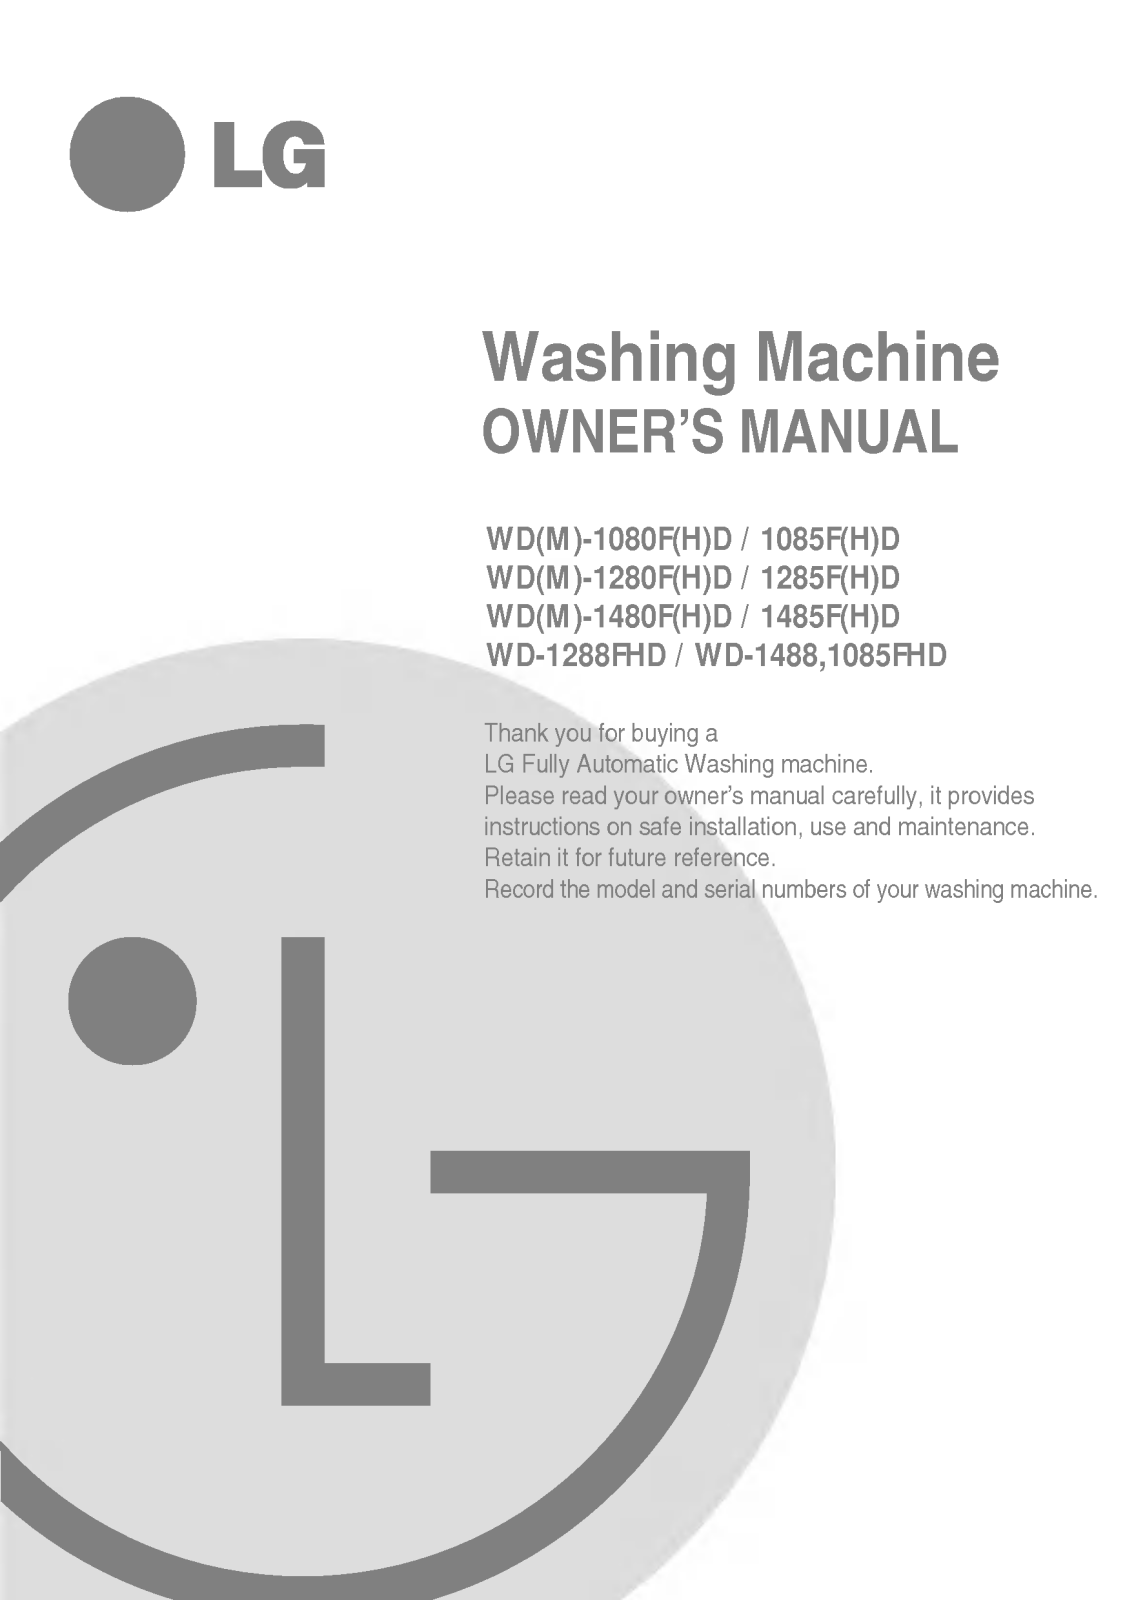 LG WD-1480FHD Owner’s Manual